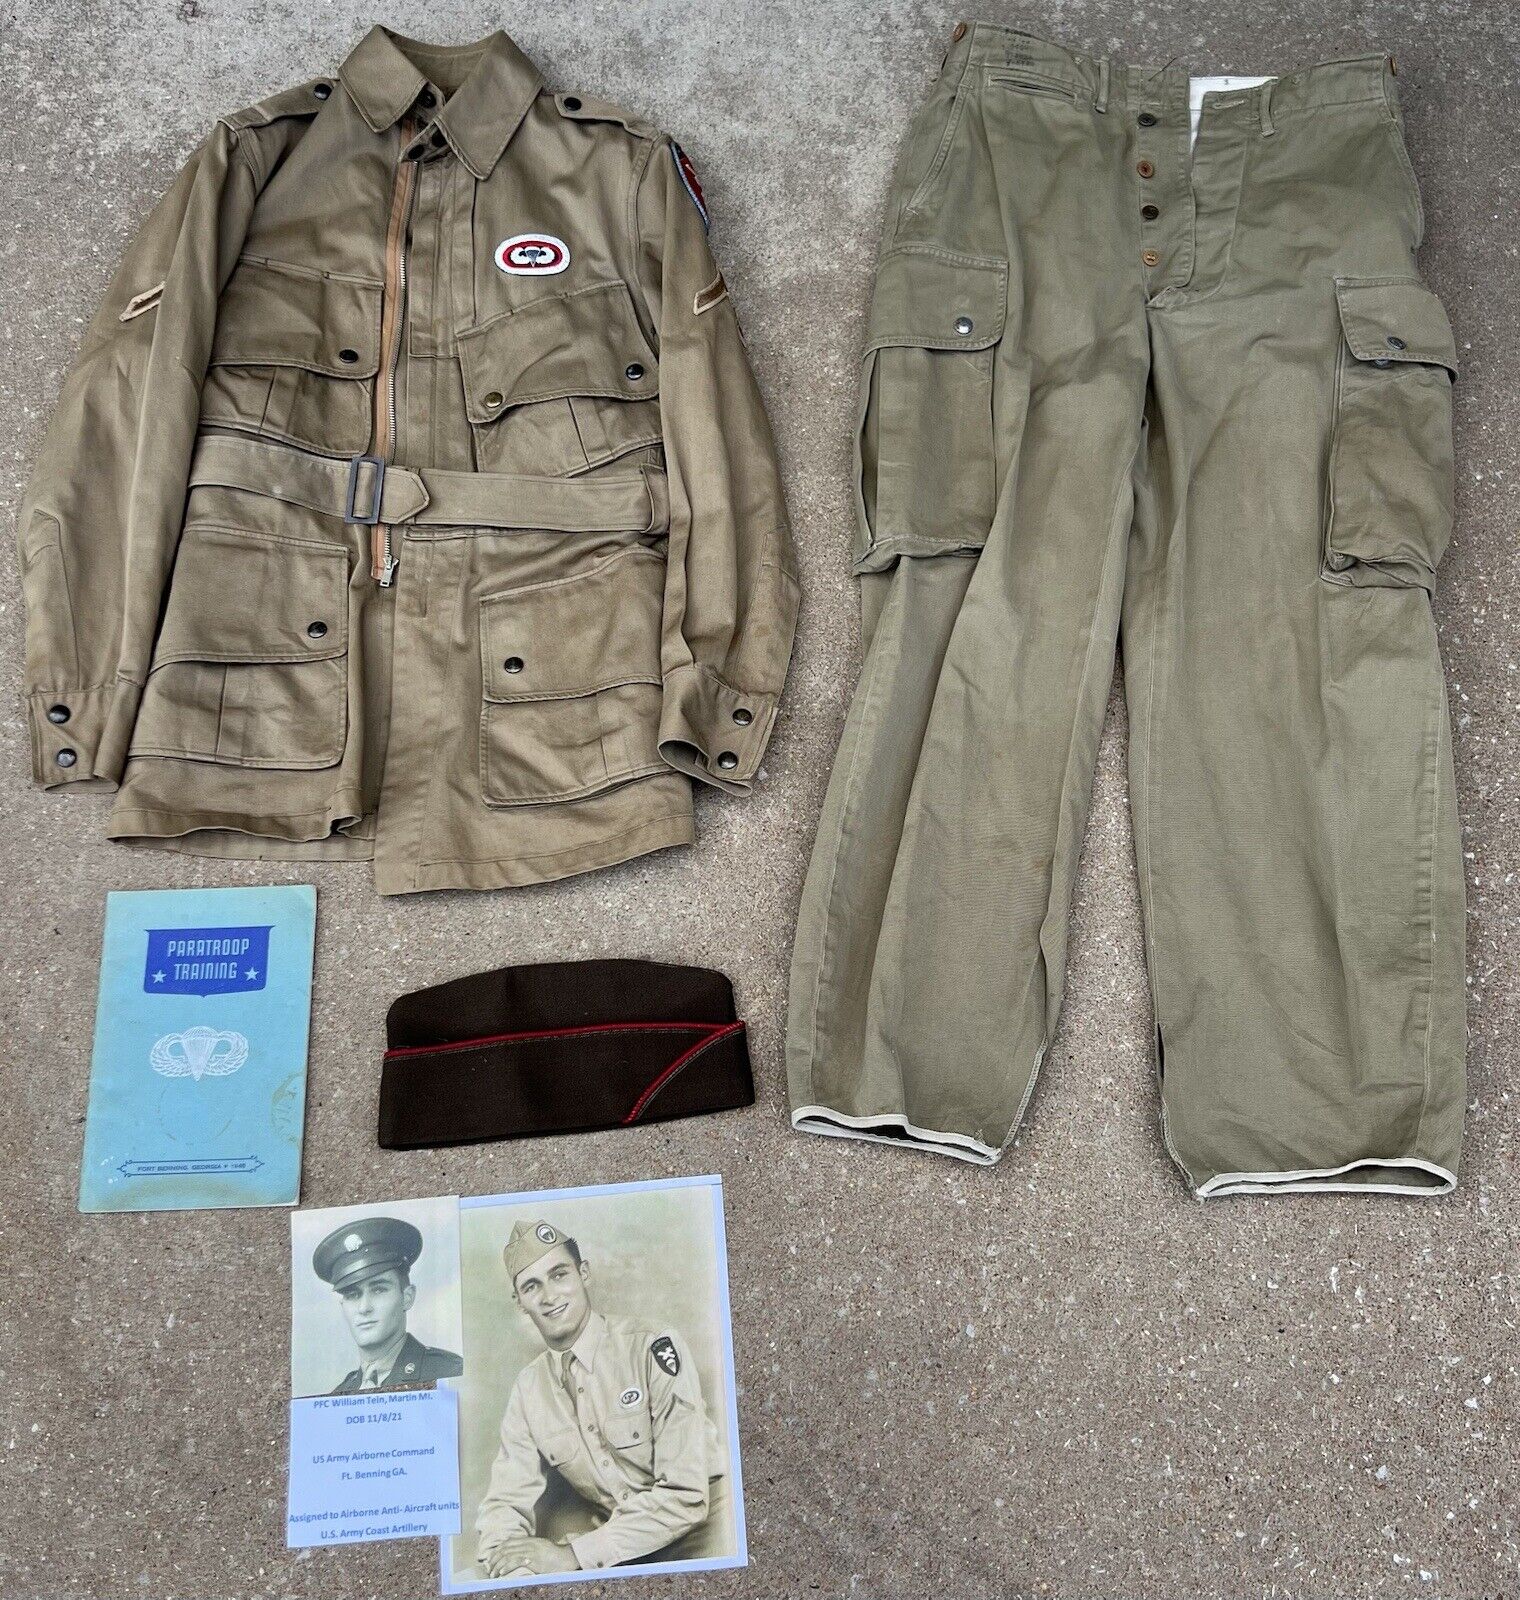 Ww2 Airborne Paratrooper Anti-Aircraft Named M-1942 Jacket & Pants Grouping